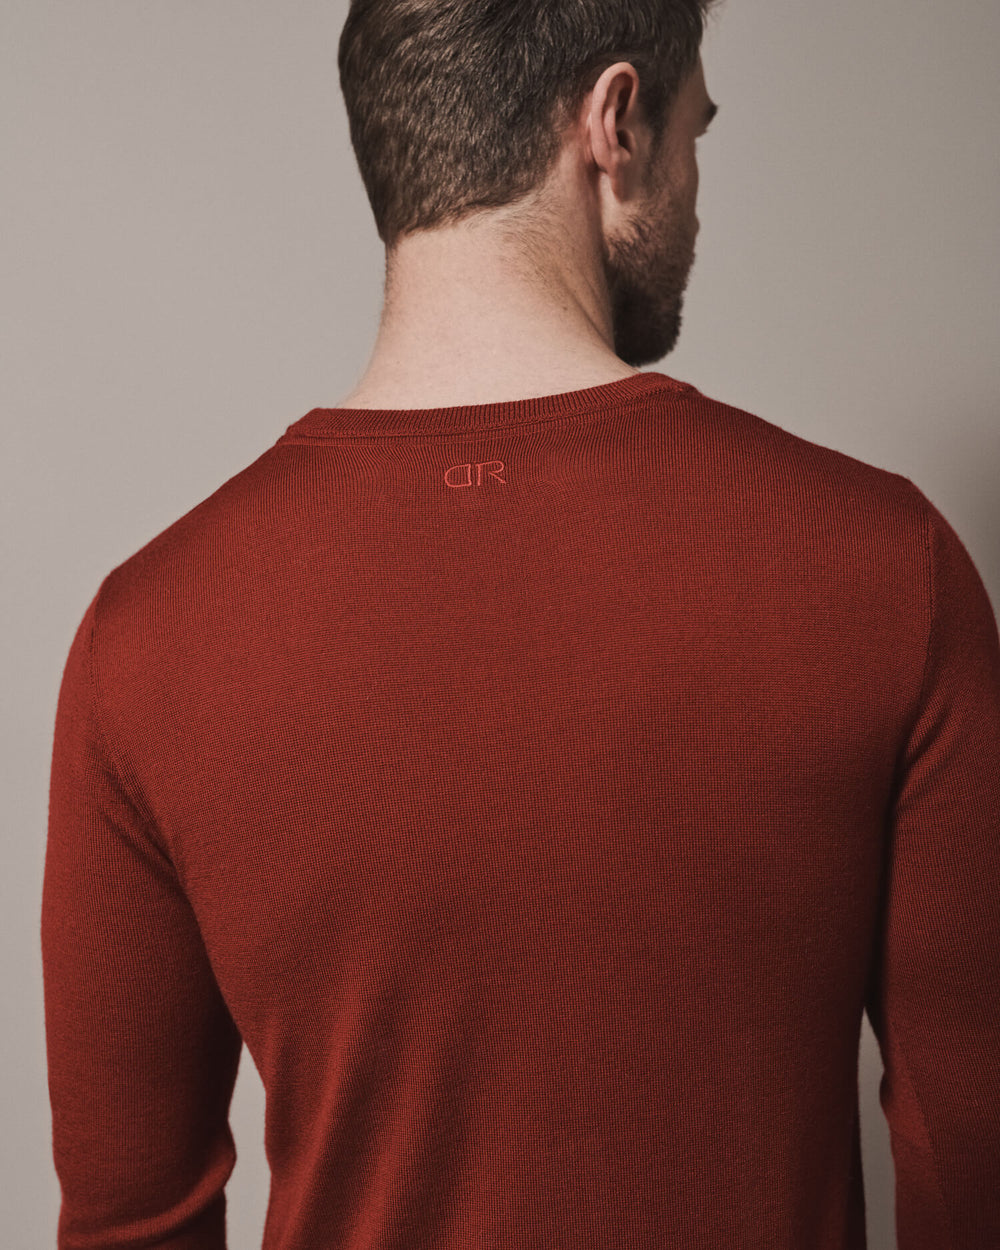 Our extra-fine merino wool crew neck jumpers for men and women in maroon red are made from a lightweight fabric and reactive natural fibre. Finished with our signature brand logo with red stitching. Ideal for layering under our waterproof dry robes for spectating touchdown sports or walking the dog.